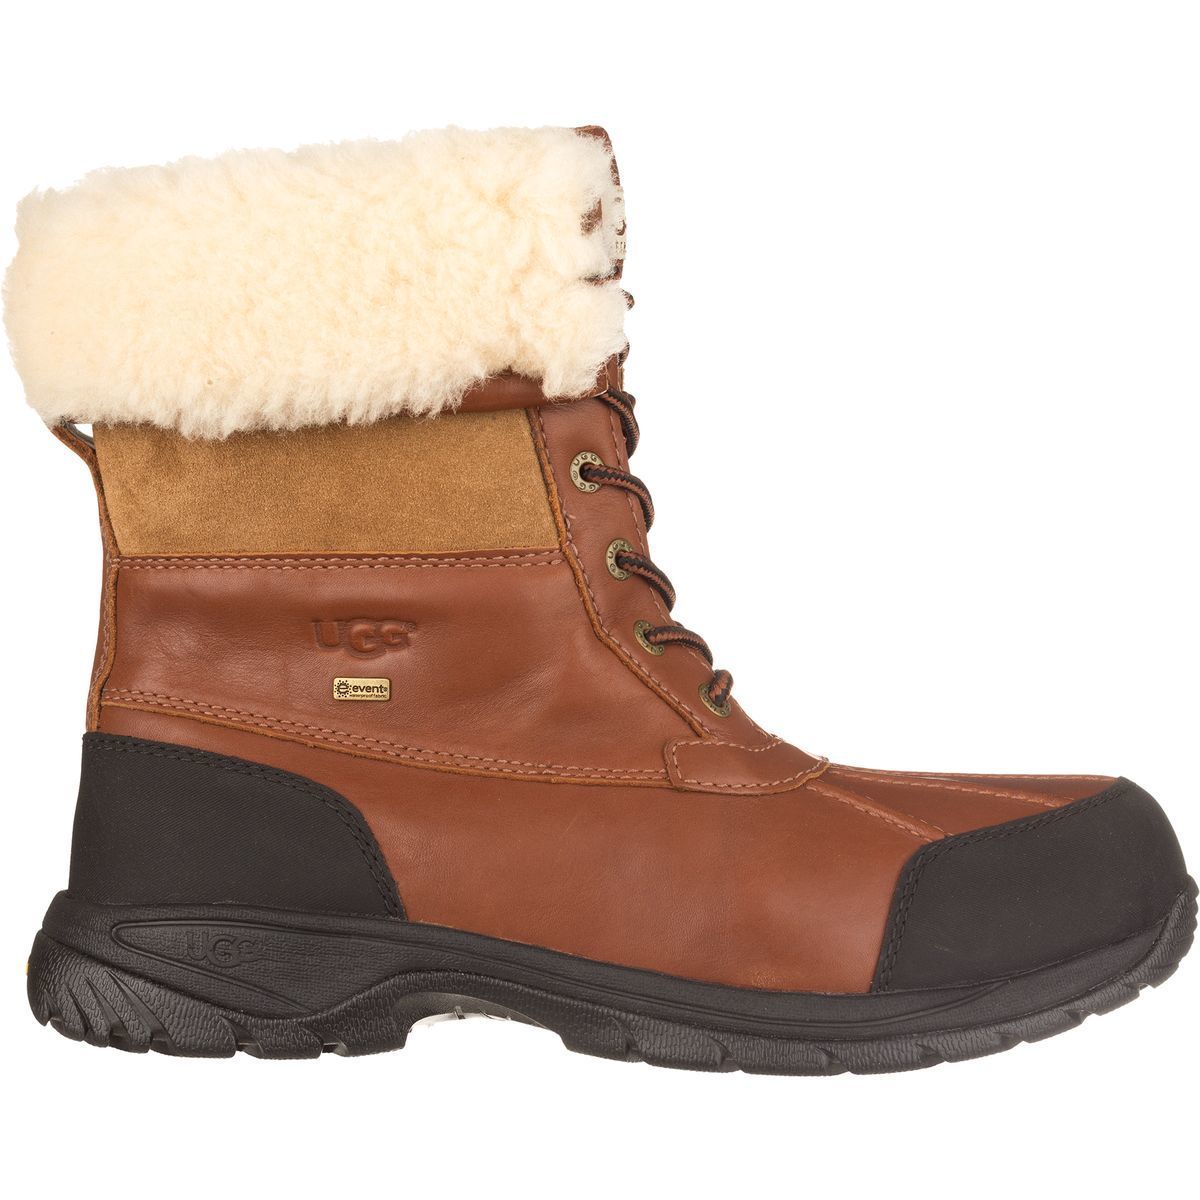 Ugg Boots Model 5521 Division Of Global Affairs